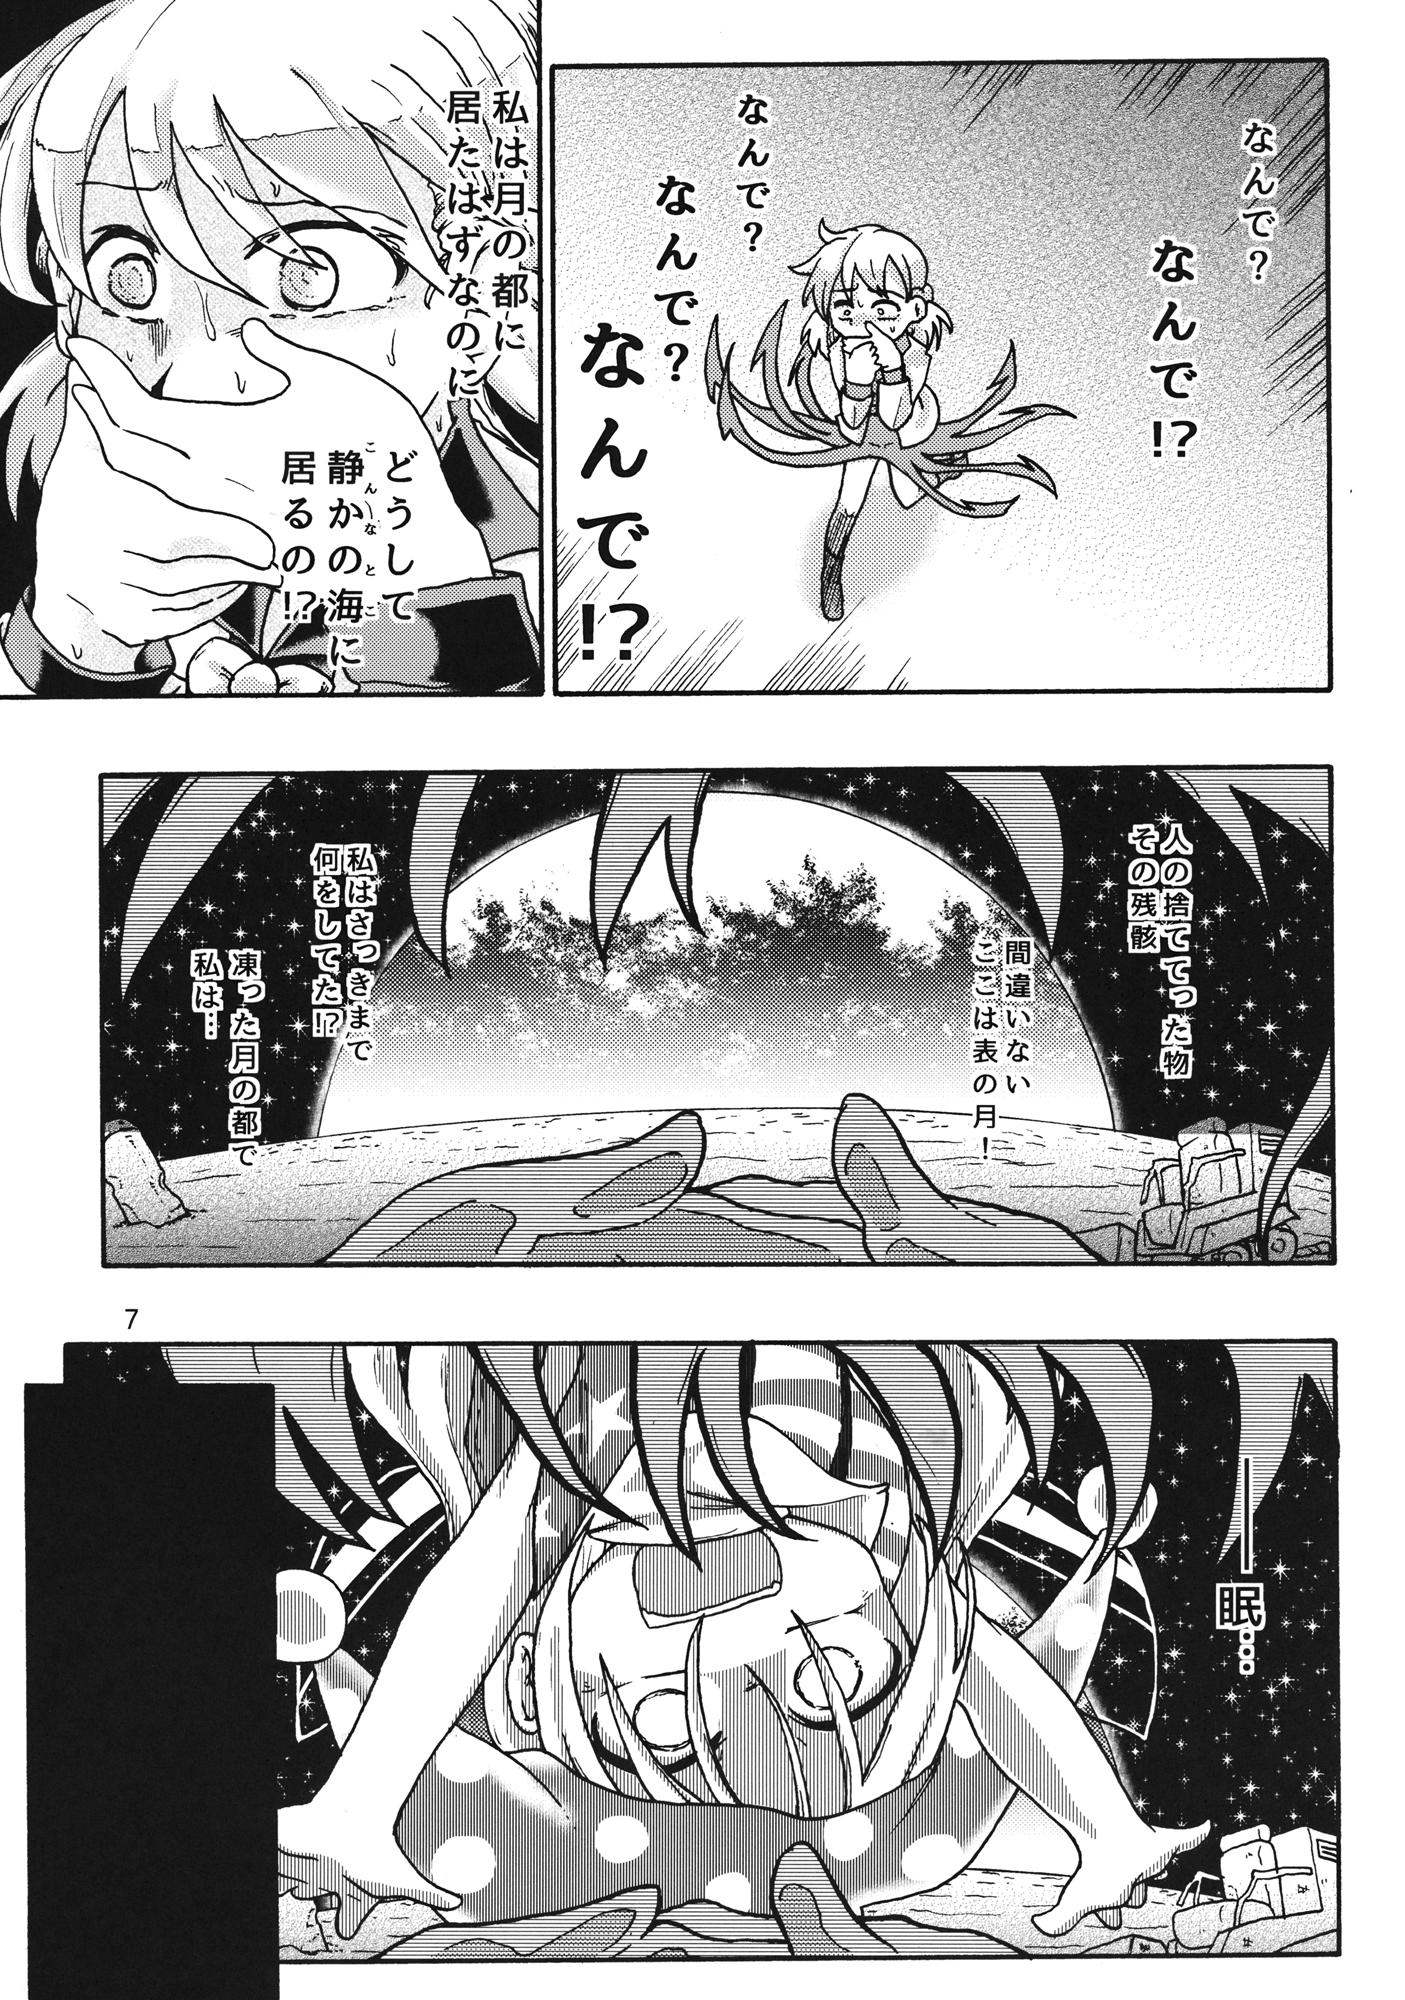 Porn Star Creeping! - Touhou project Tributo - Page 6